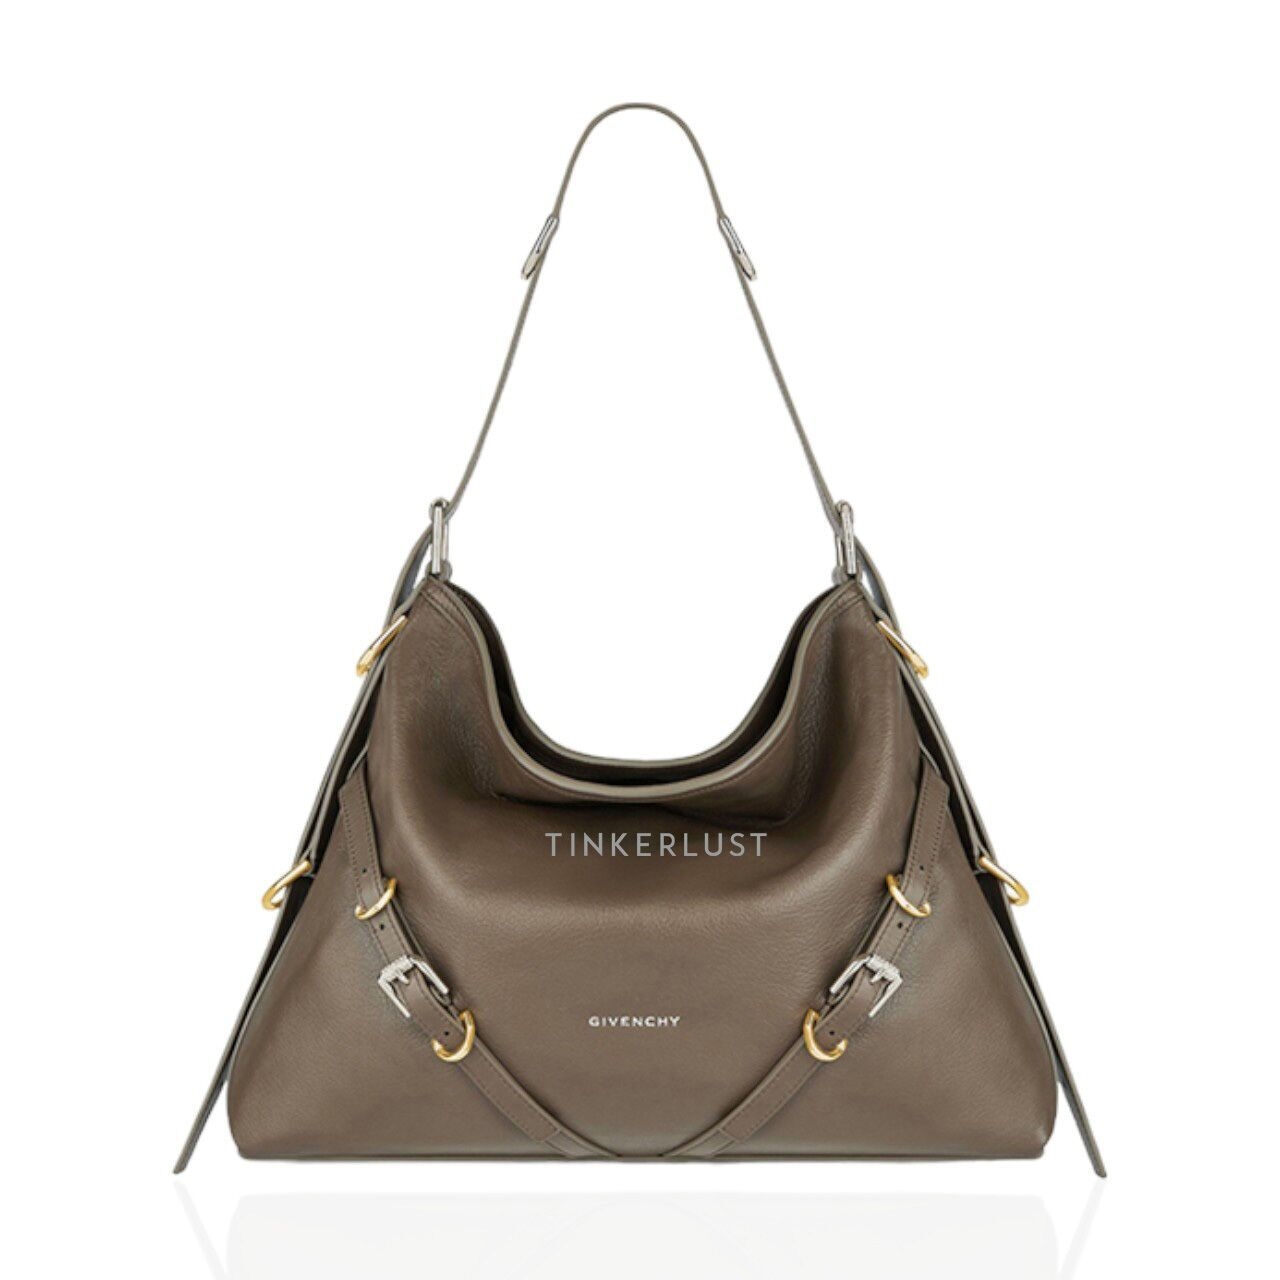 Givenchy Medium Voyou Shoulder Bag in Taupe Tumbled Calfskin Leather